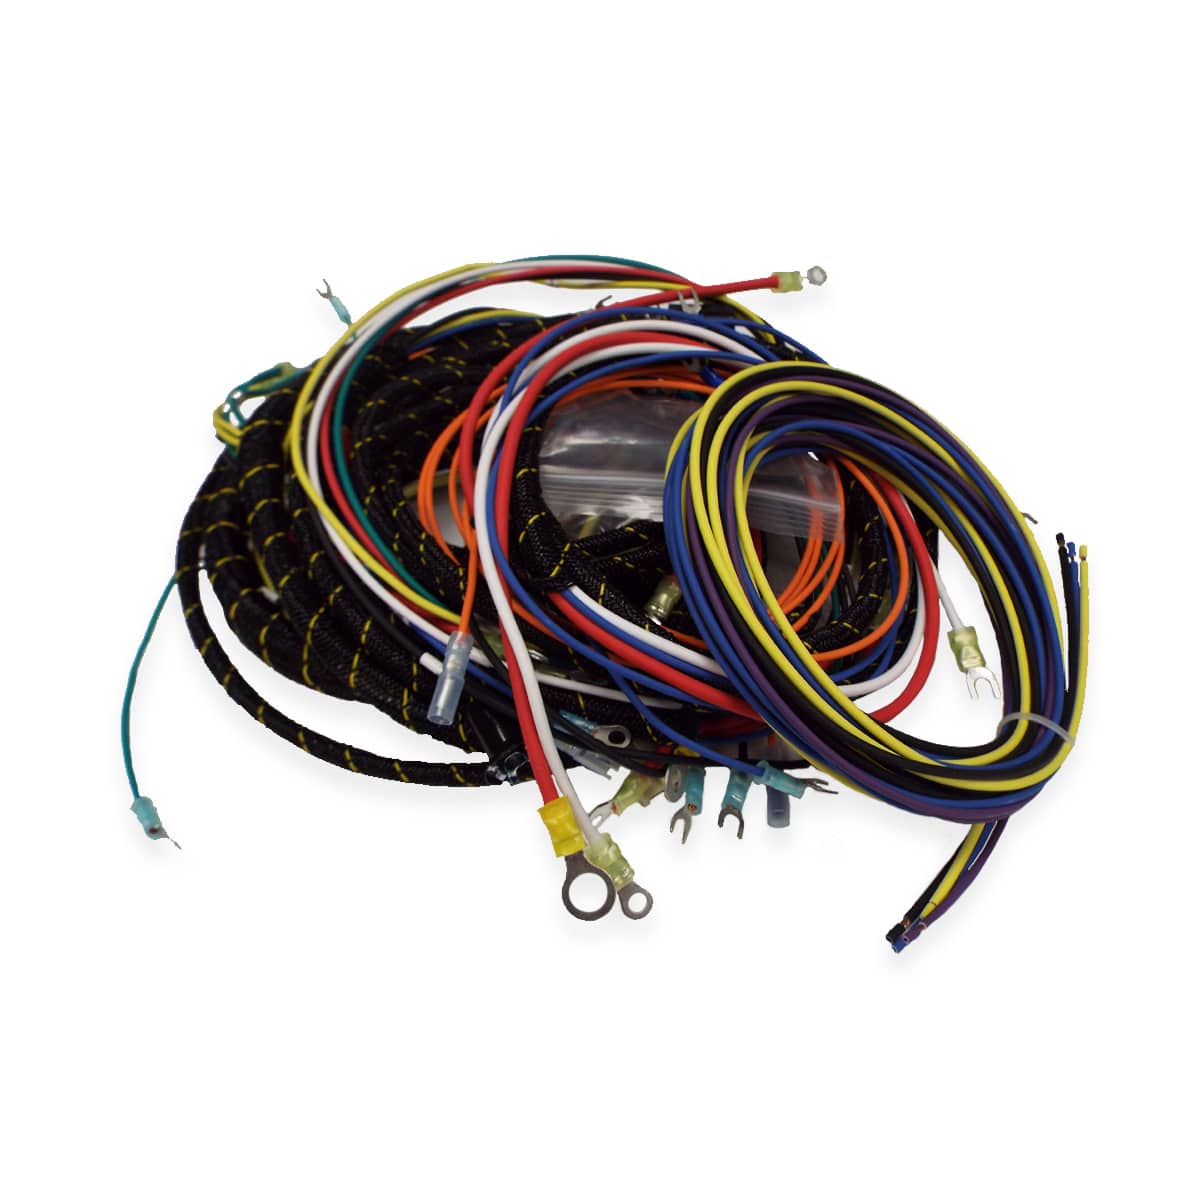 1953-Early 1955 Wiring Harness Type #2 with Alternator PVC Copper Wire Chevrolet Pickup Truck